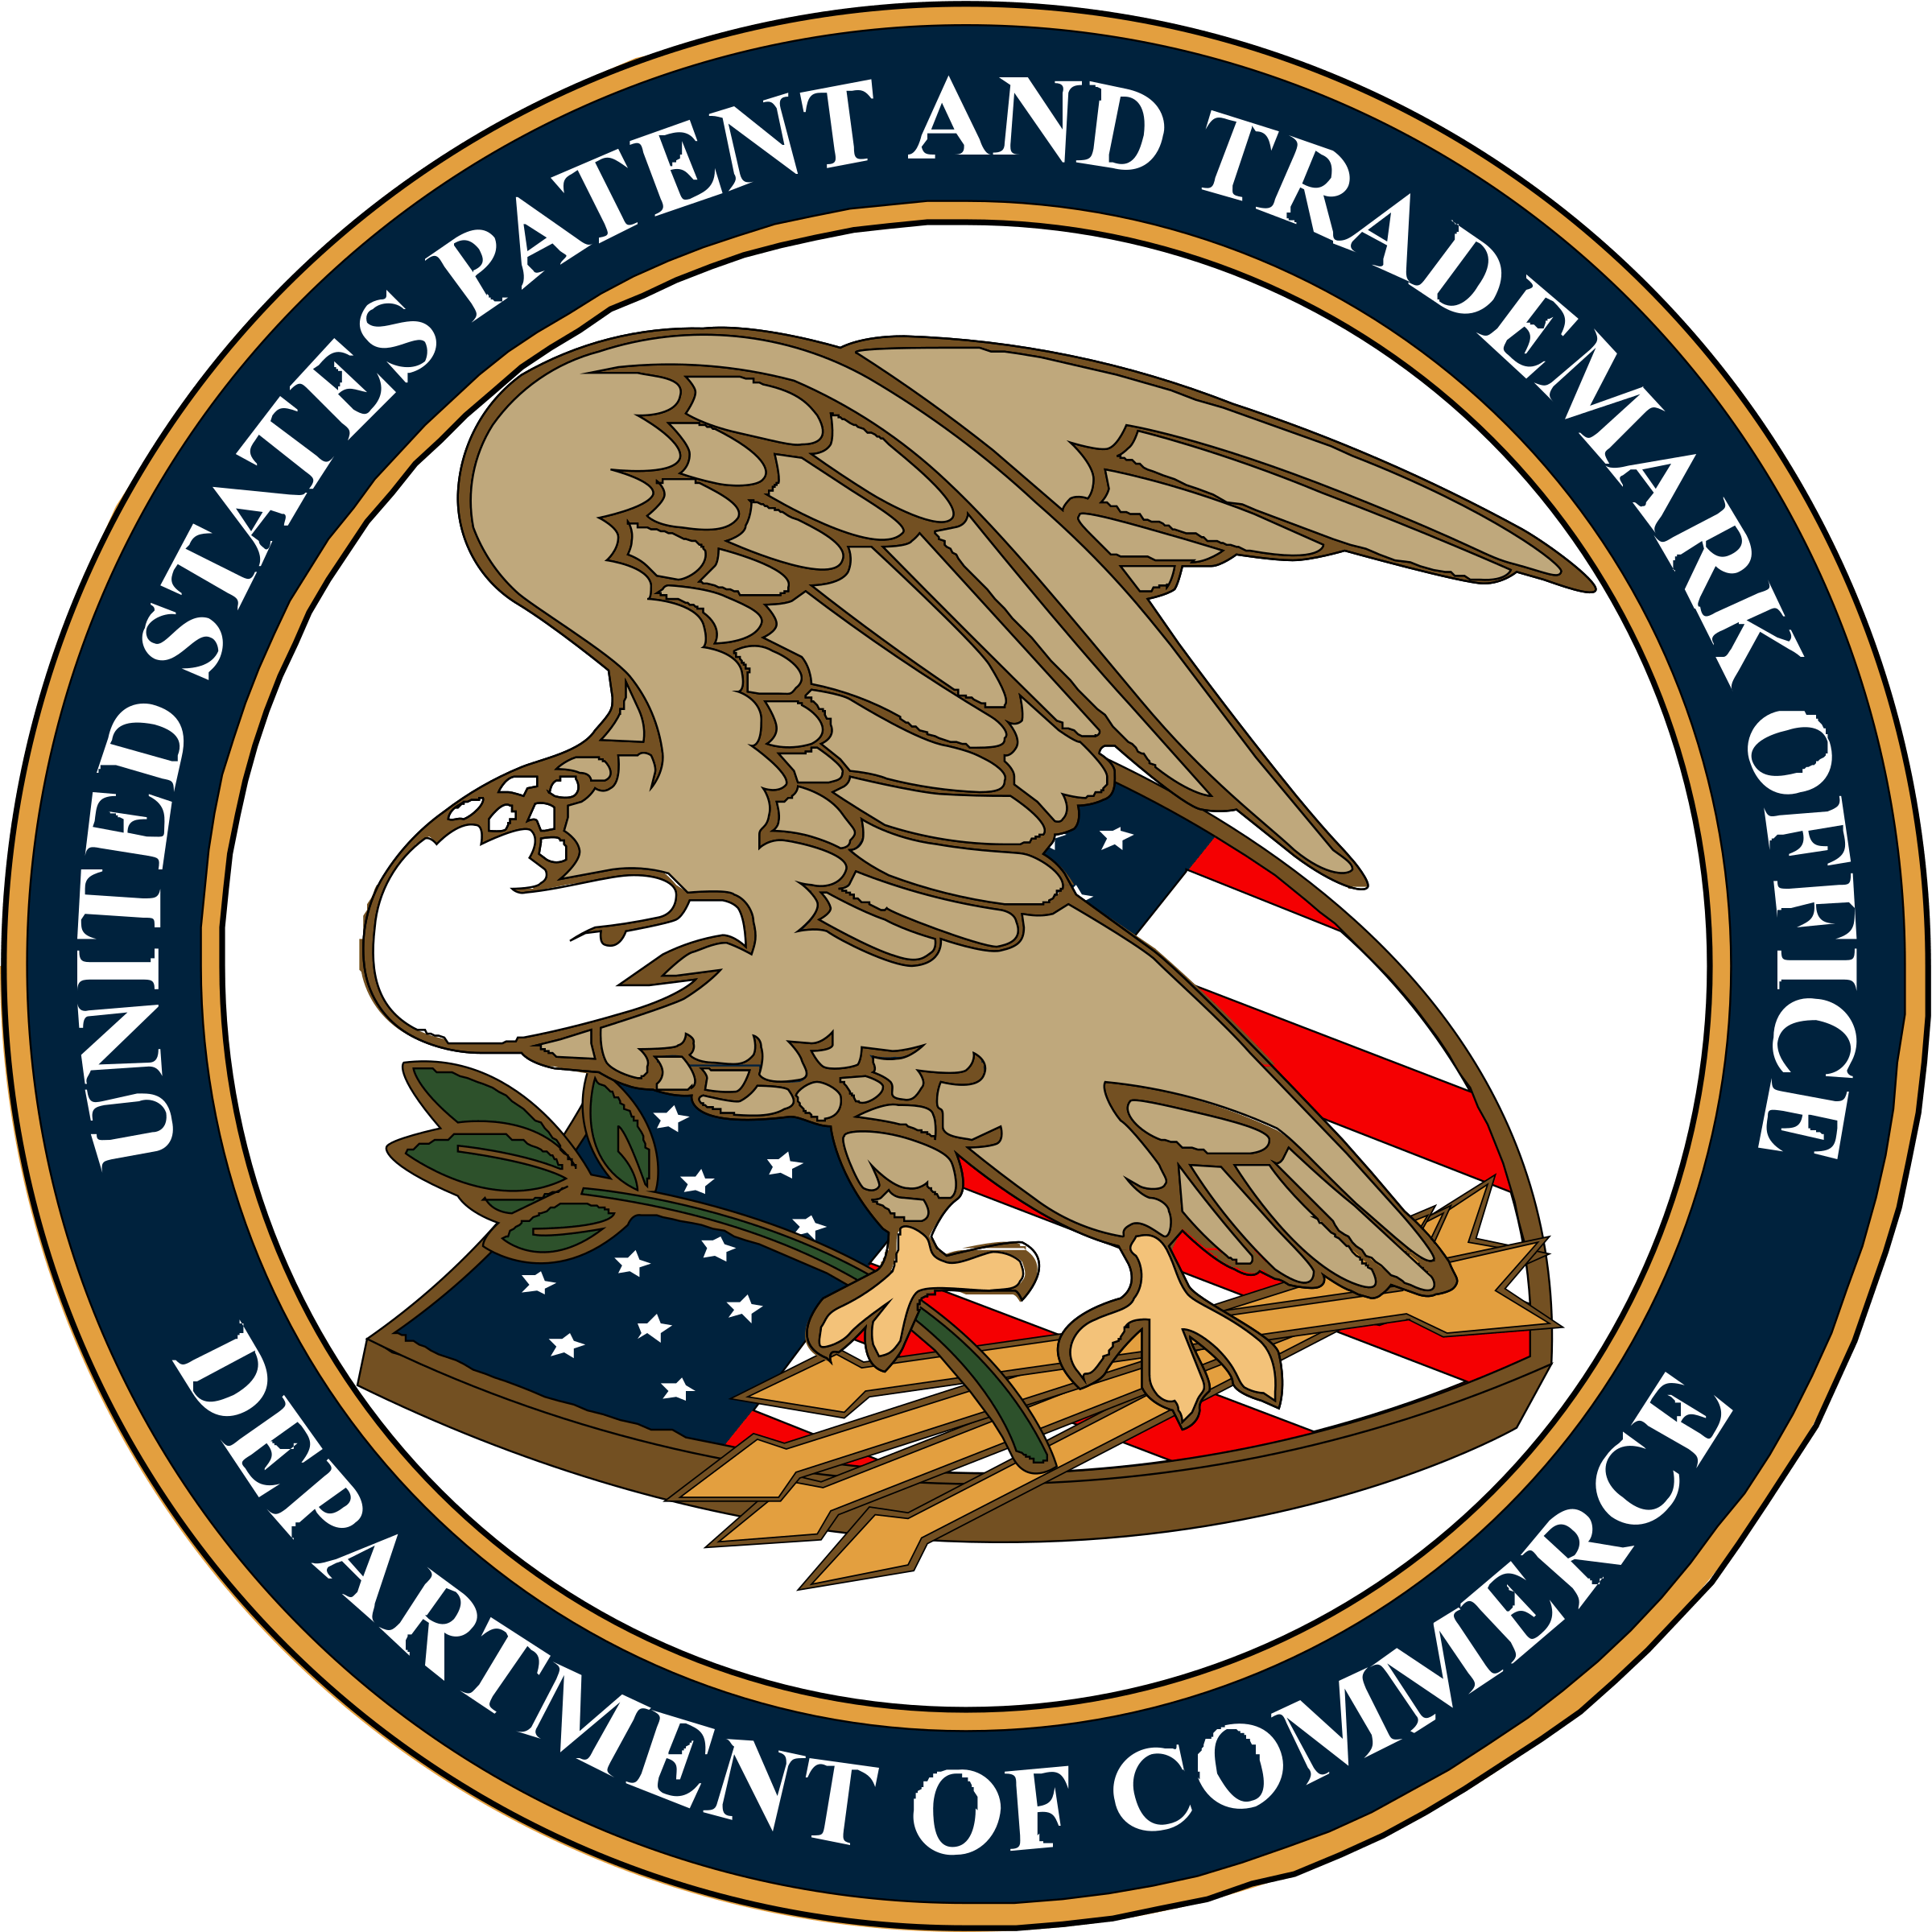 Patent Logo - US Patent and Trademark Office Logo PNG Transparent & SVG Vector ...